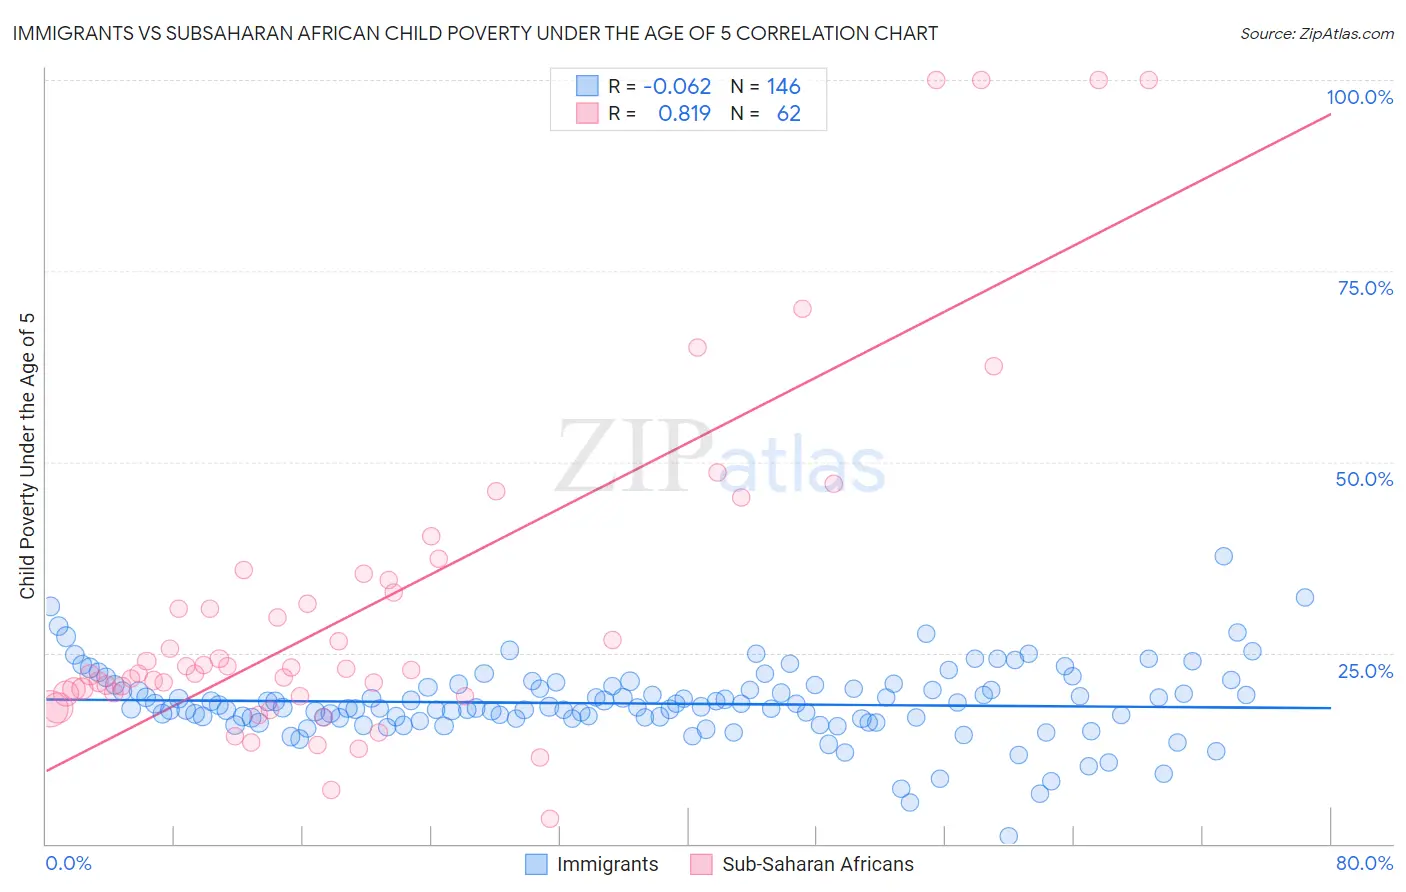 Immigrants vs Subsaharan African Child Poverty Under the Age of 5